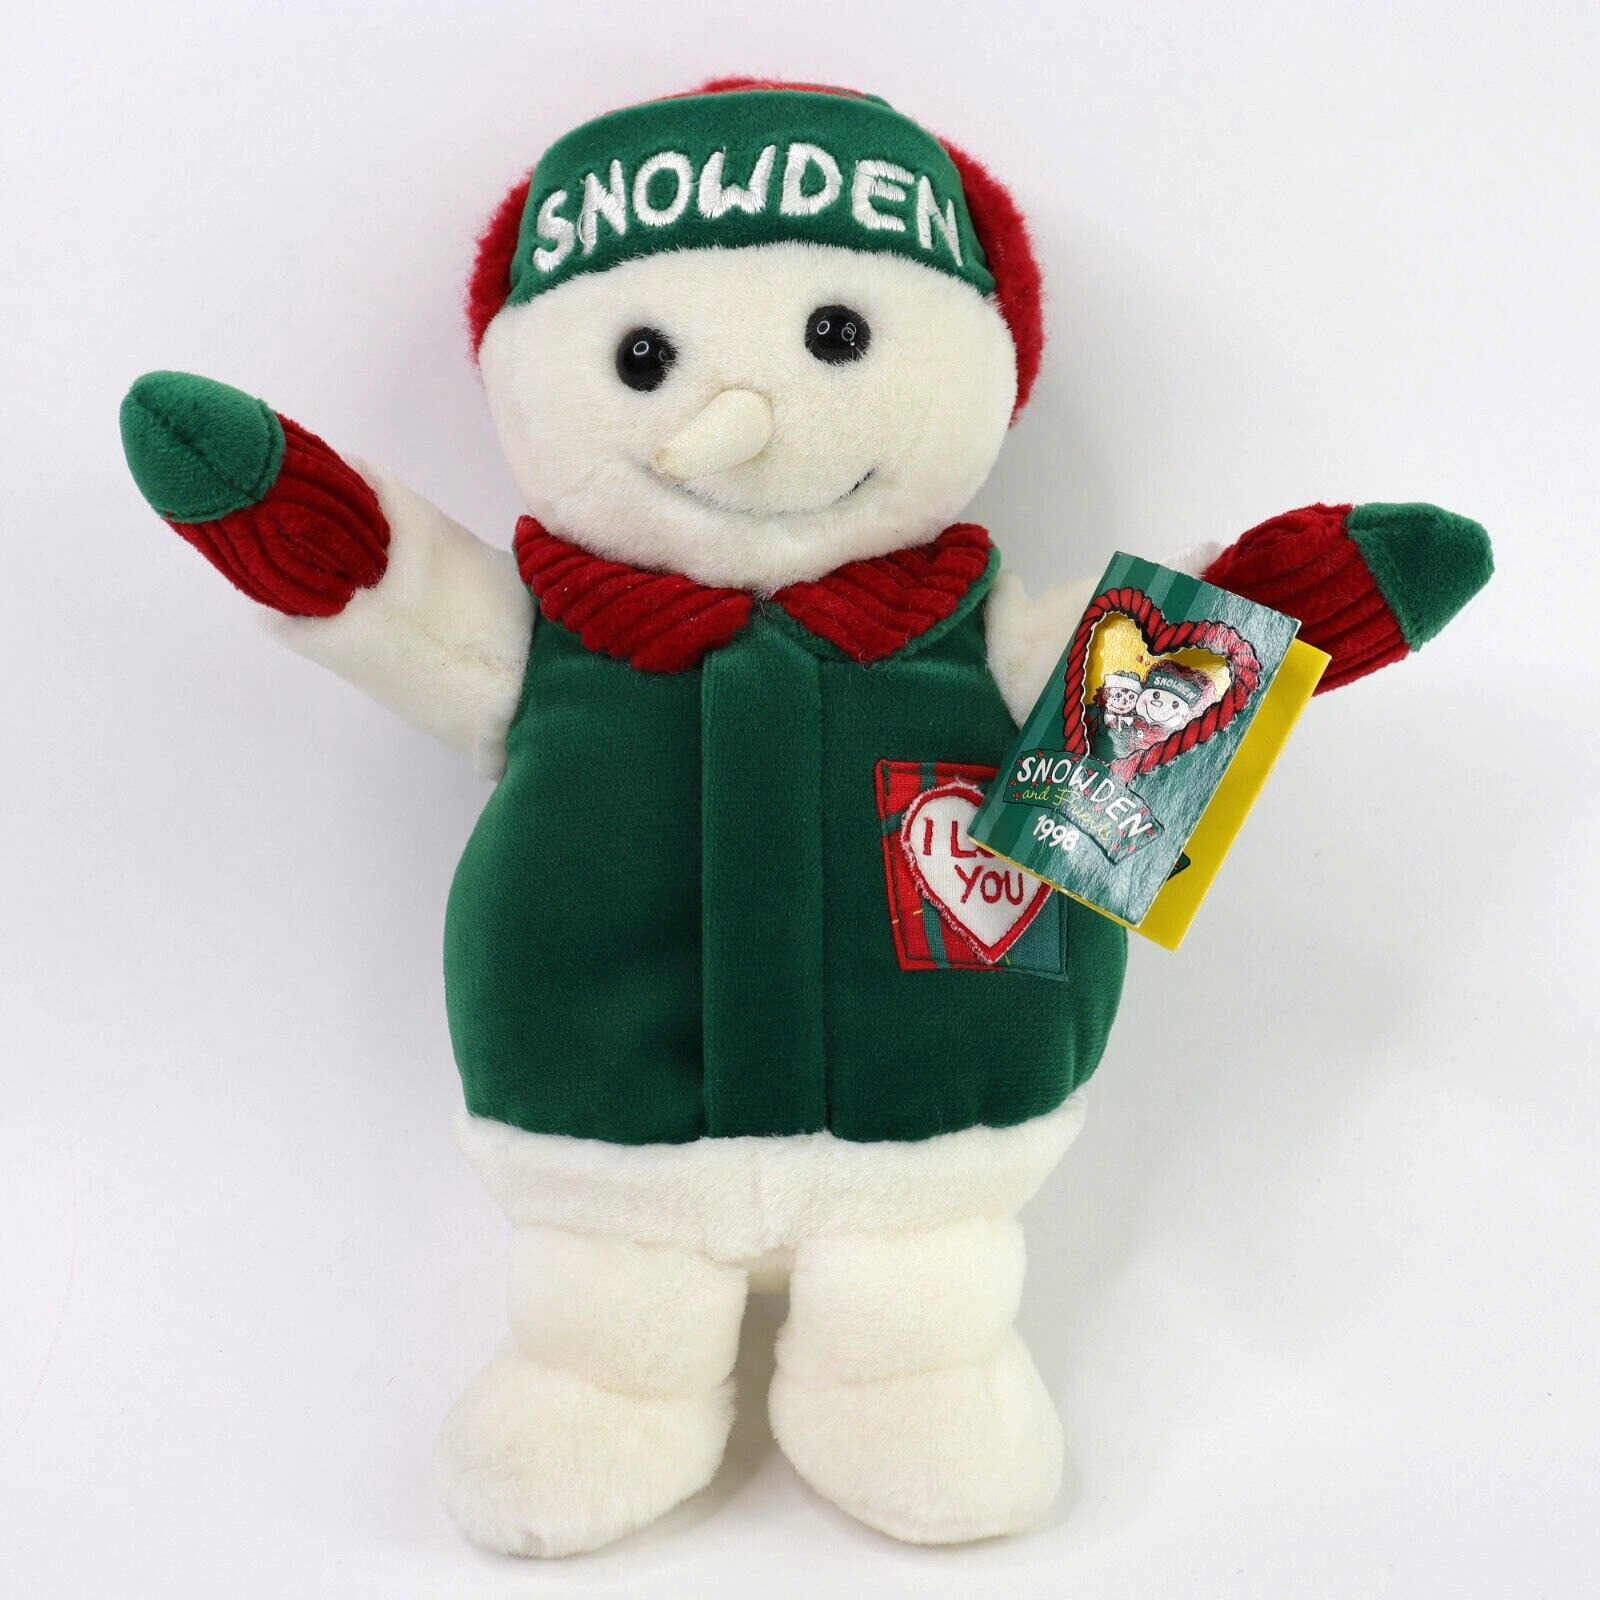 1998 Snowden and Friends Snowman Plush Toy Doll Christmas 10” Tags Stuffed